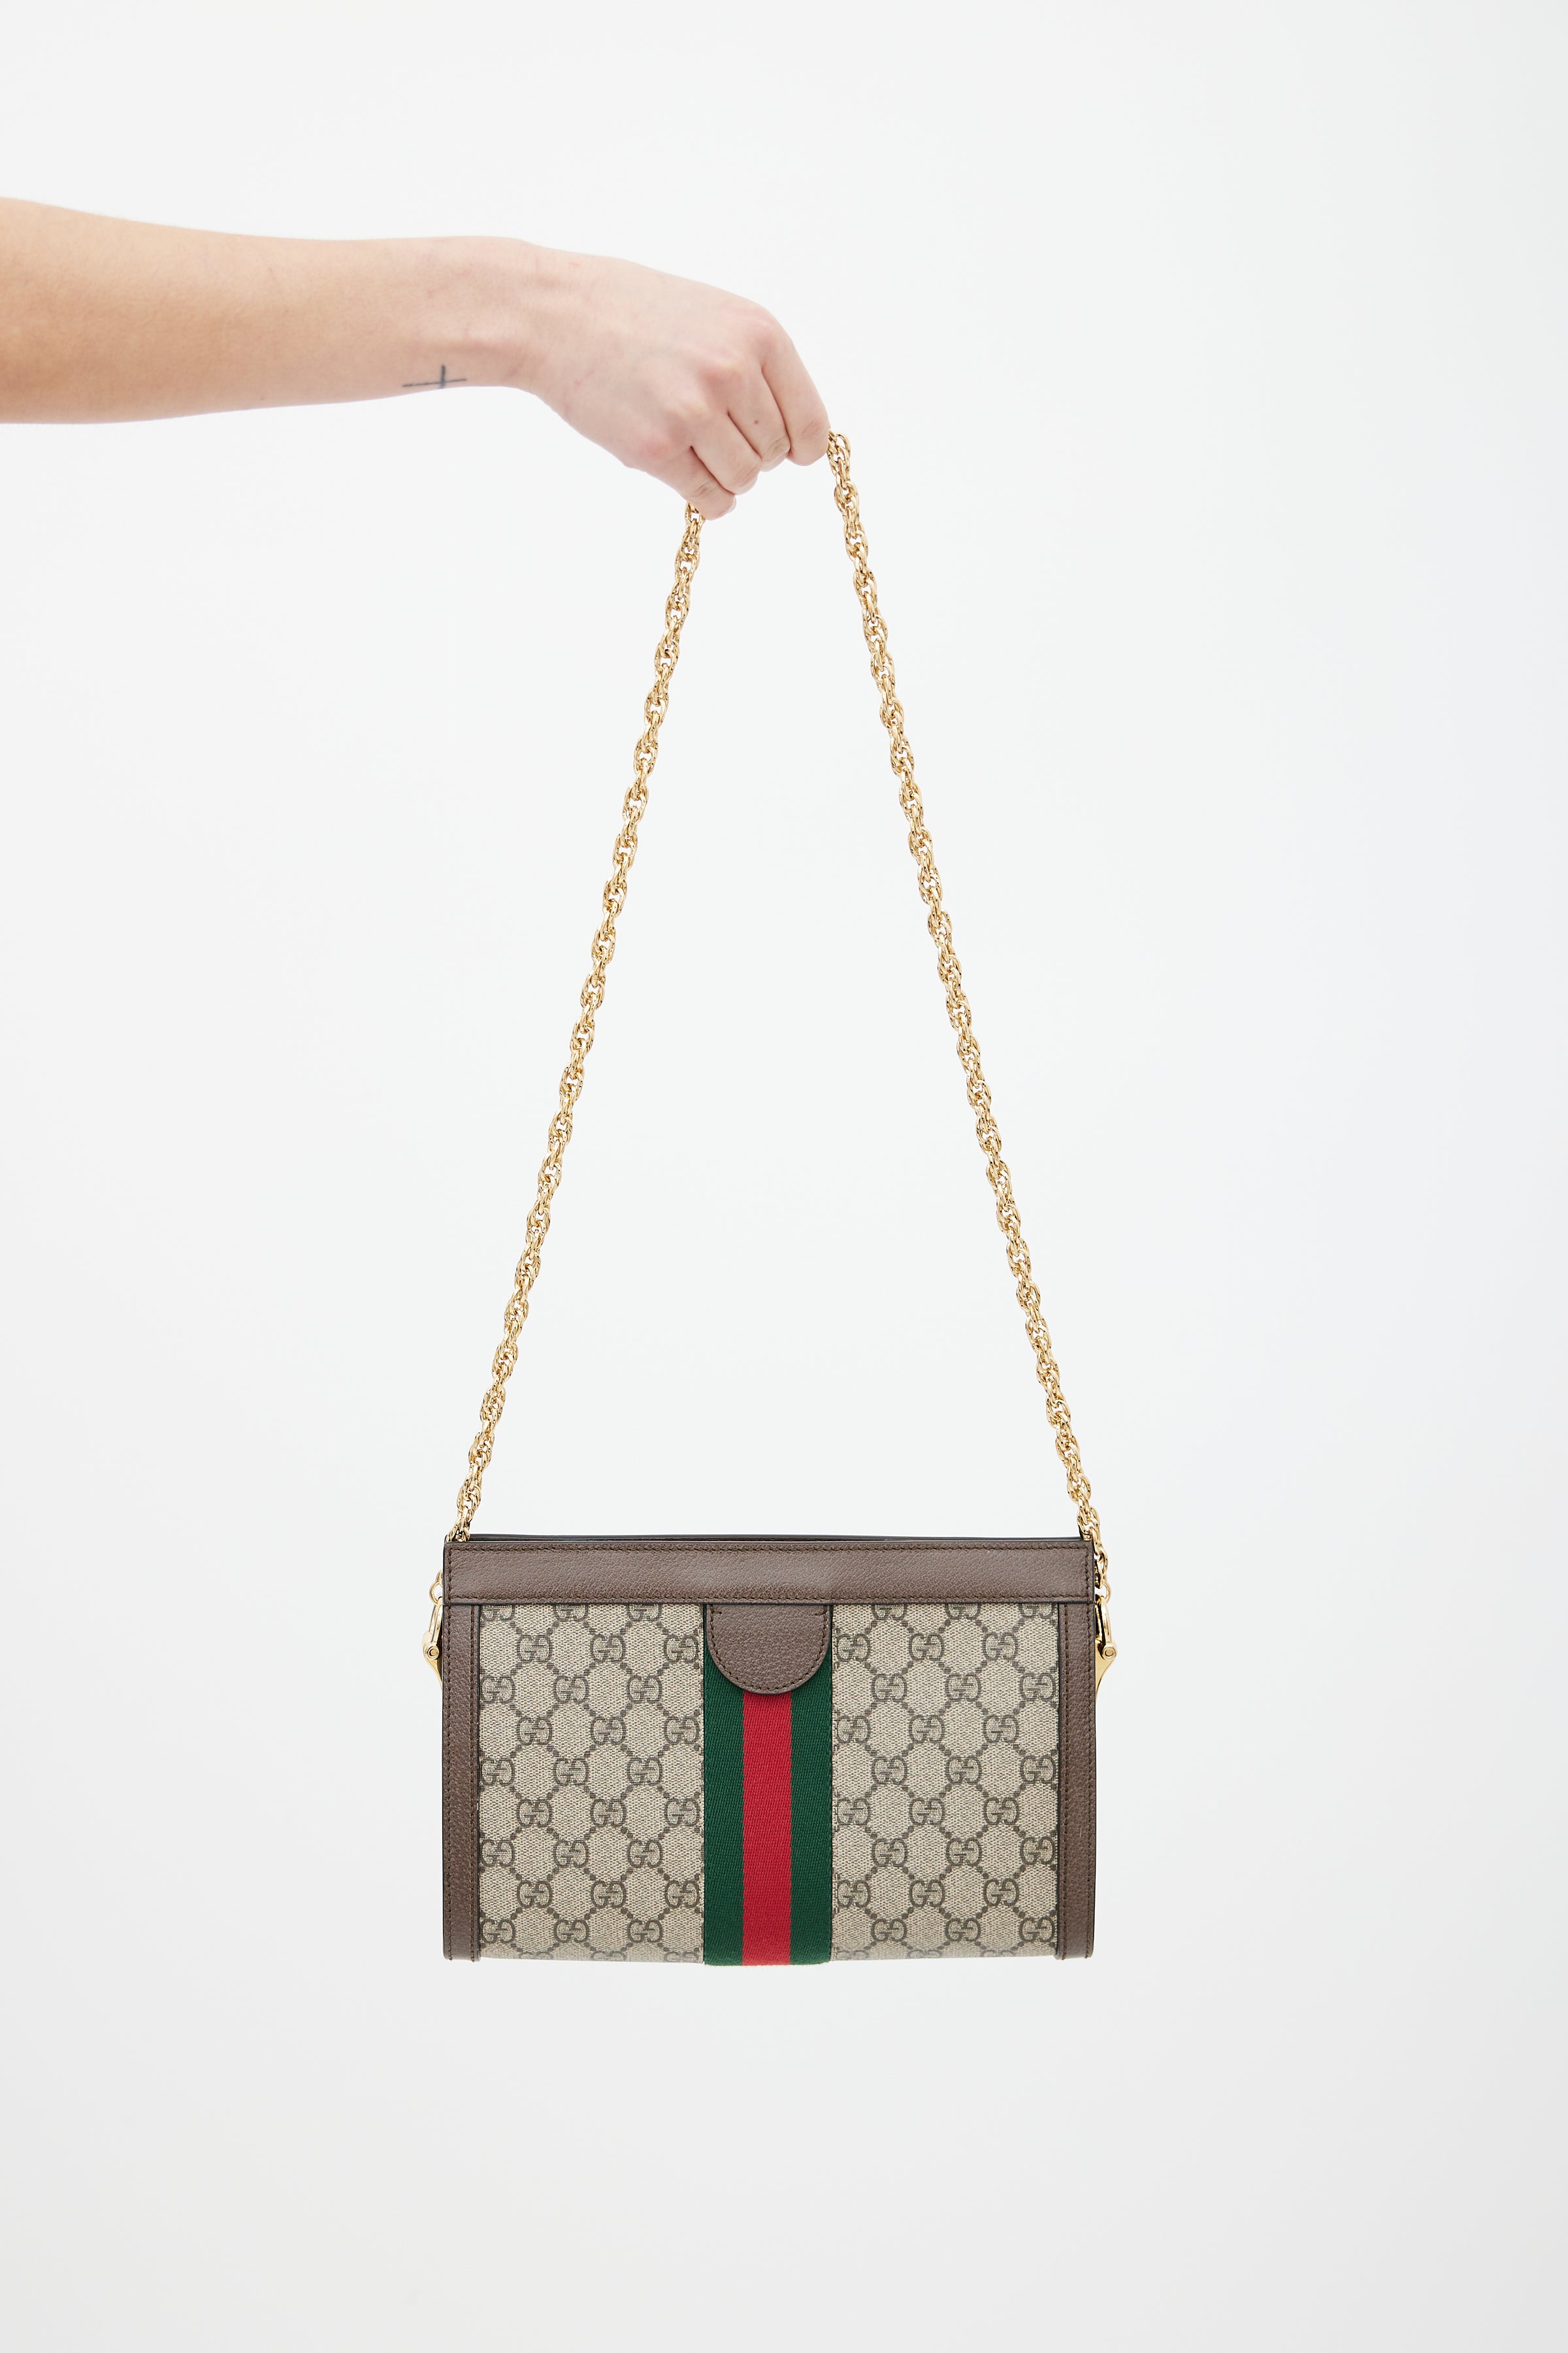 Gucci Ophidia Convertible Clutch GG Web Small Brown In, 54% OFF